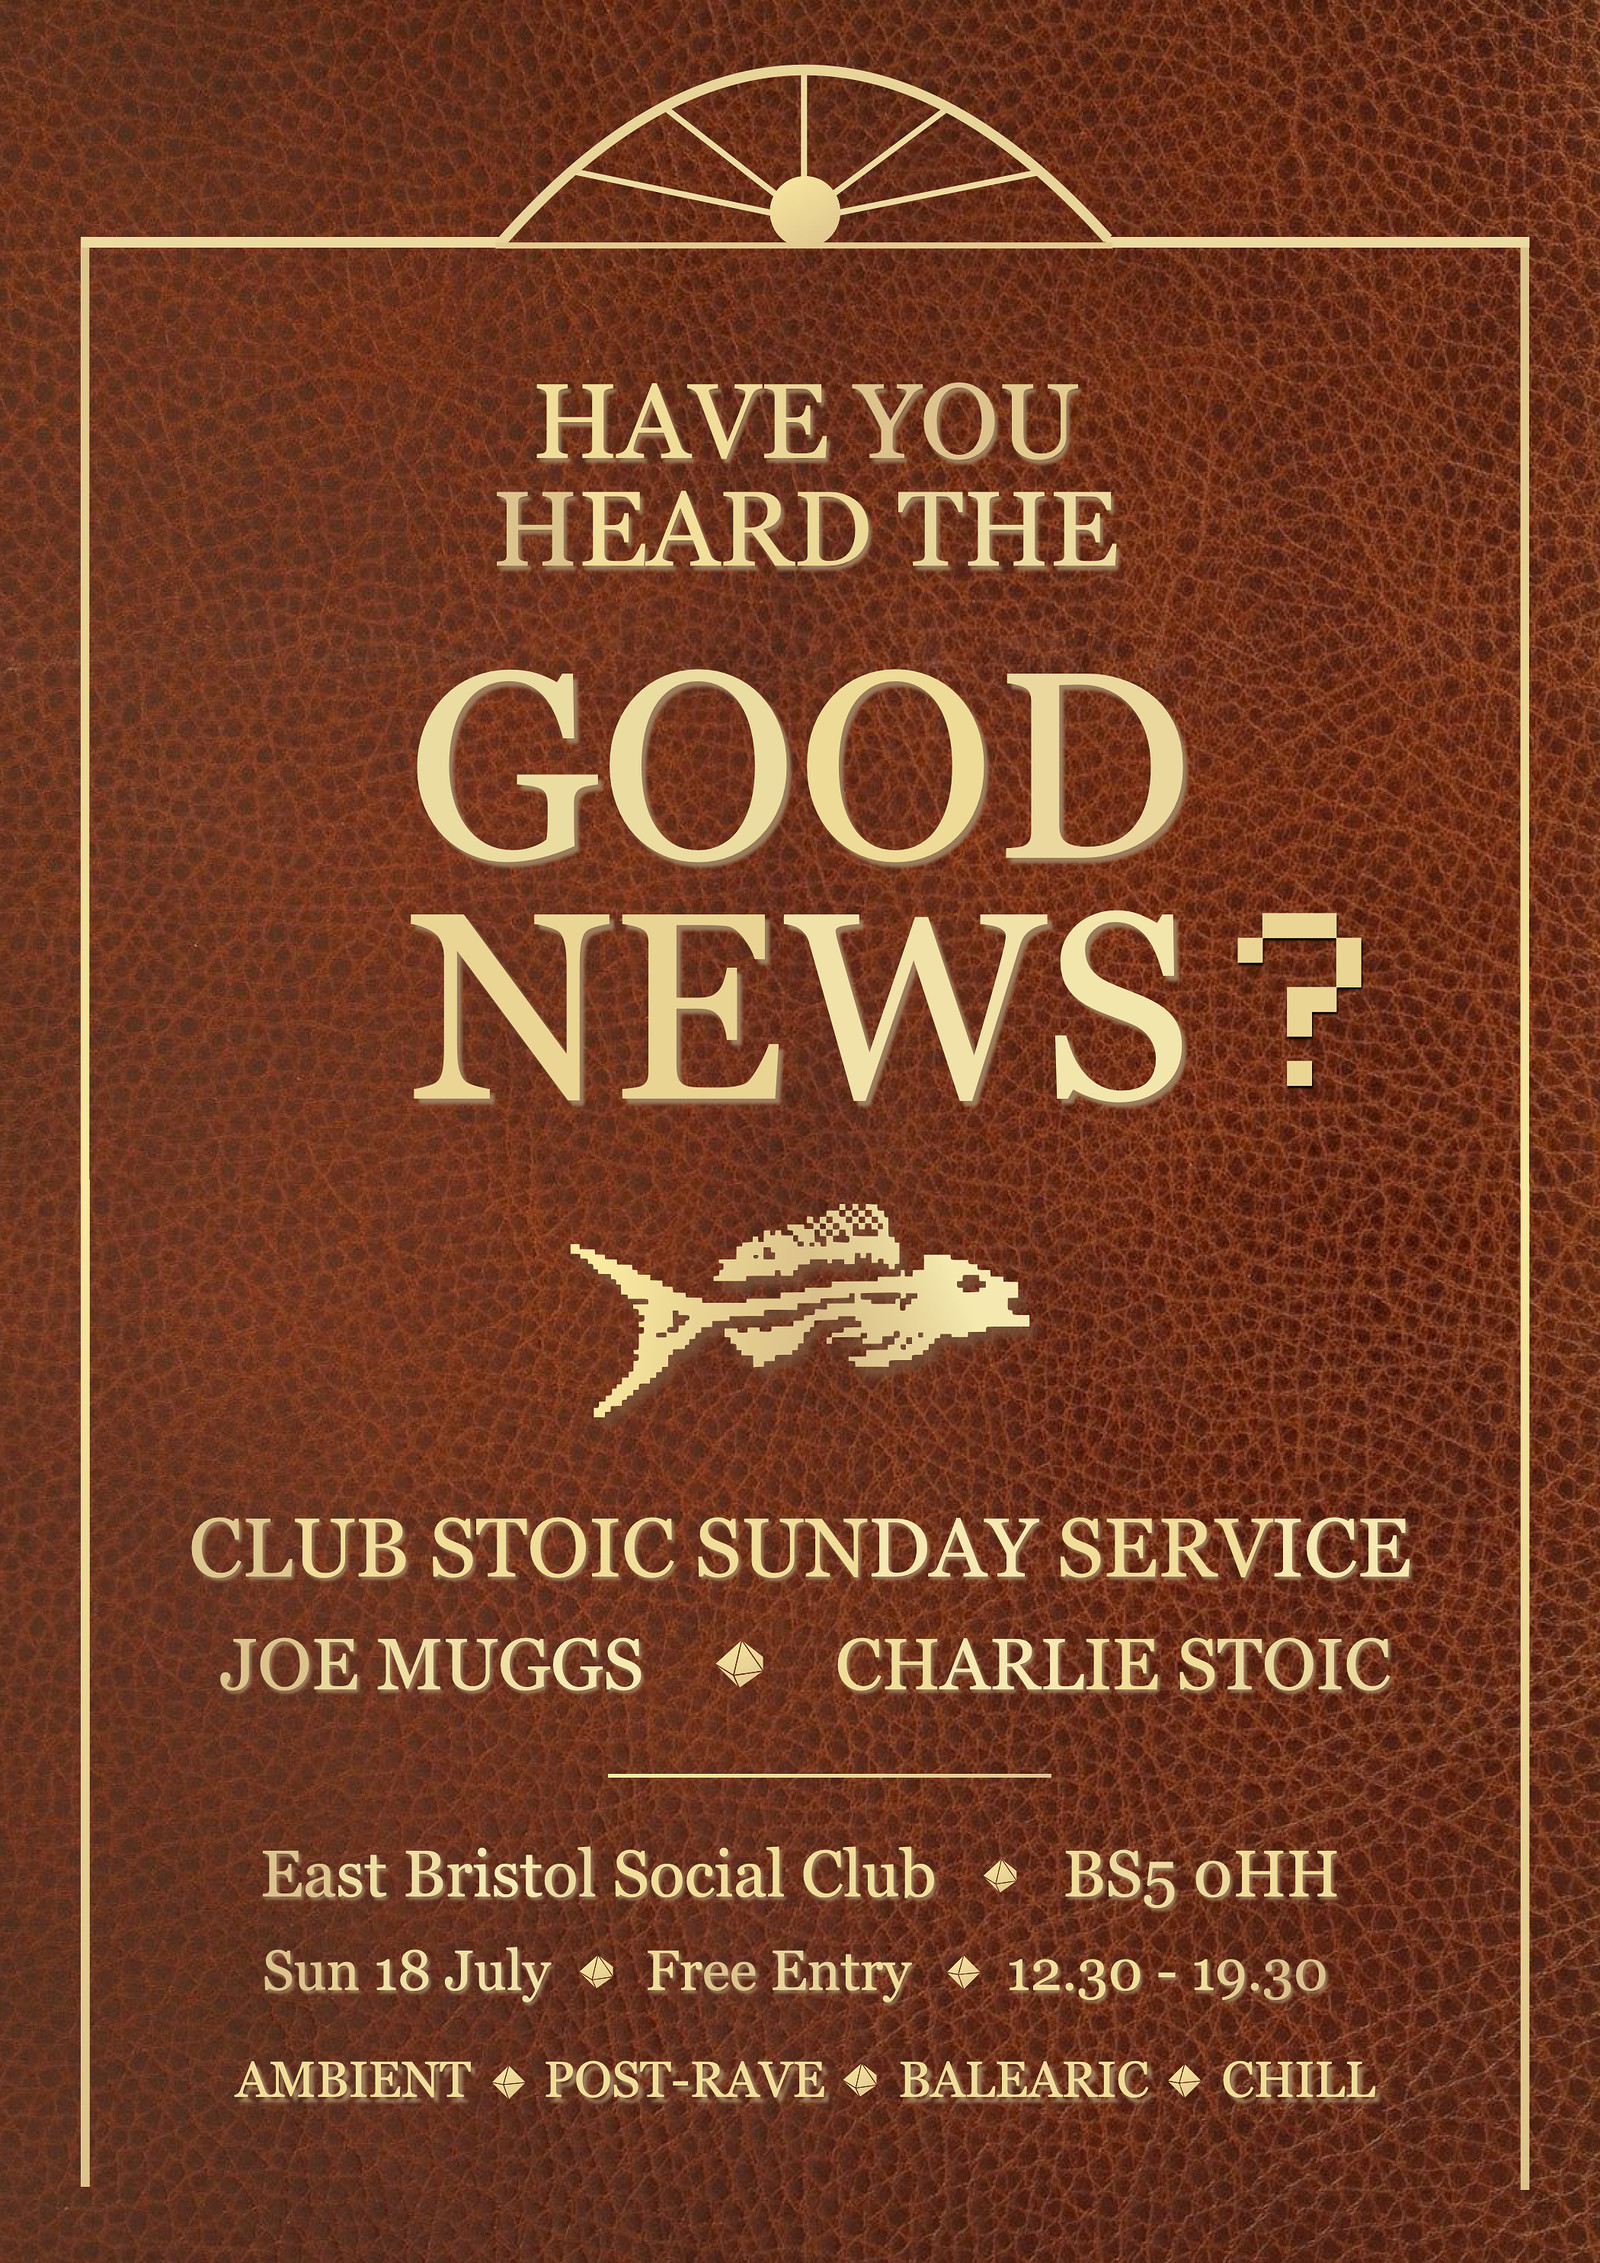 CANCELLED:Club Stoic Sunday Service with Joe Muggs at East Bristol Social Club